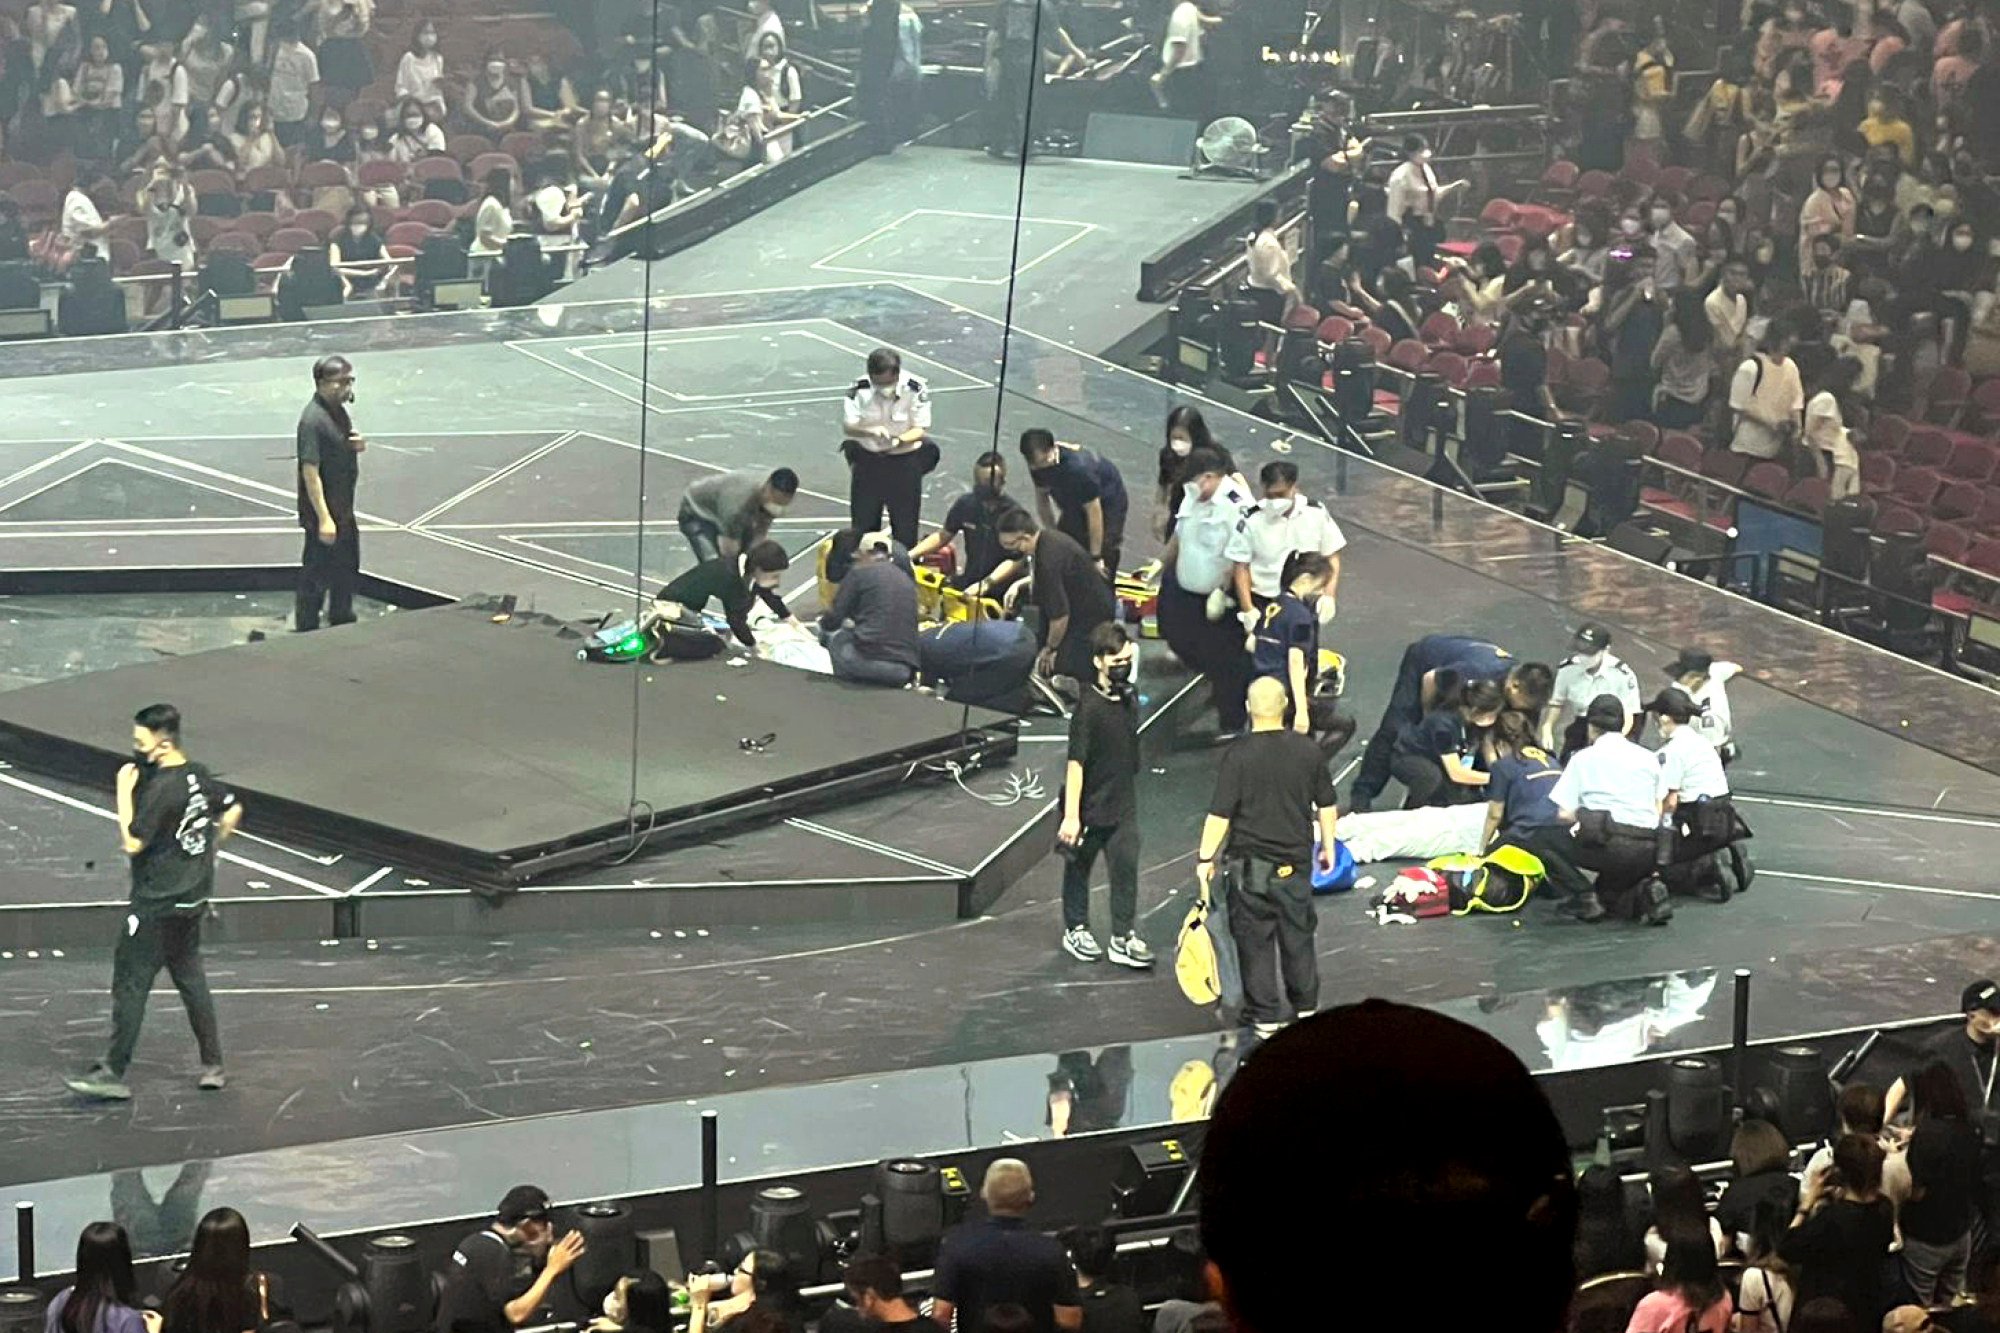 Emergency crew tend to the injured on stage as anxious audience members look on. Photo: AP